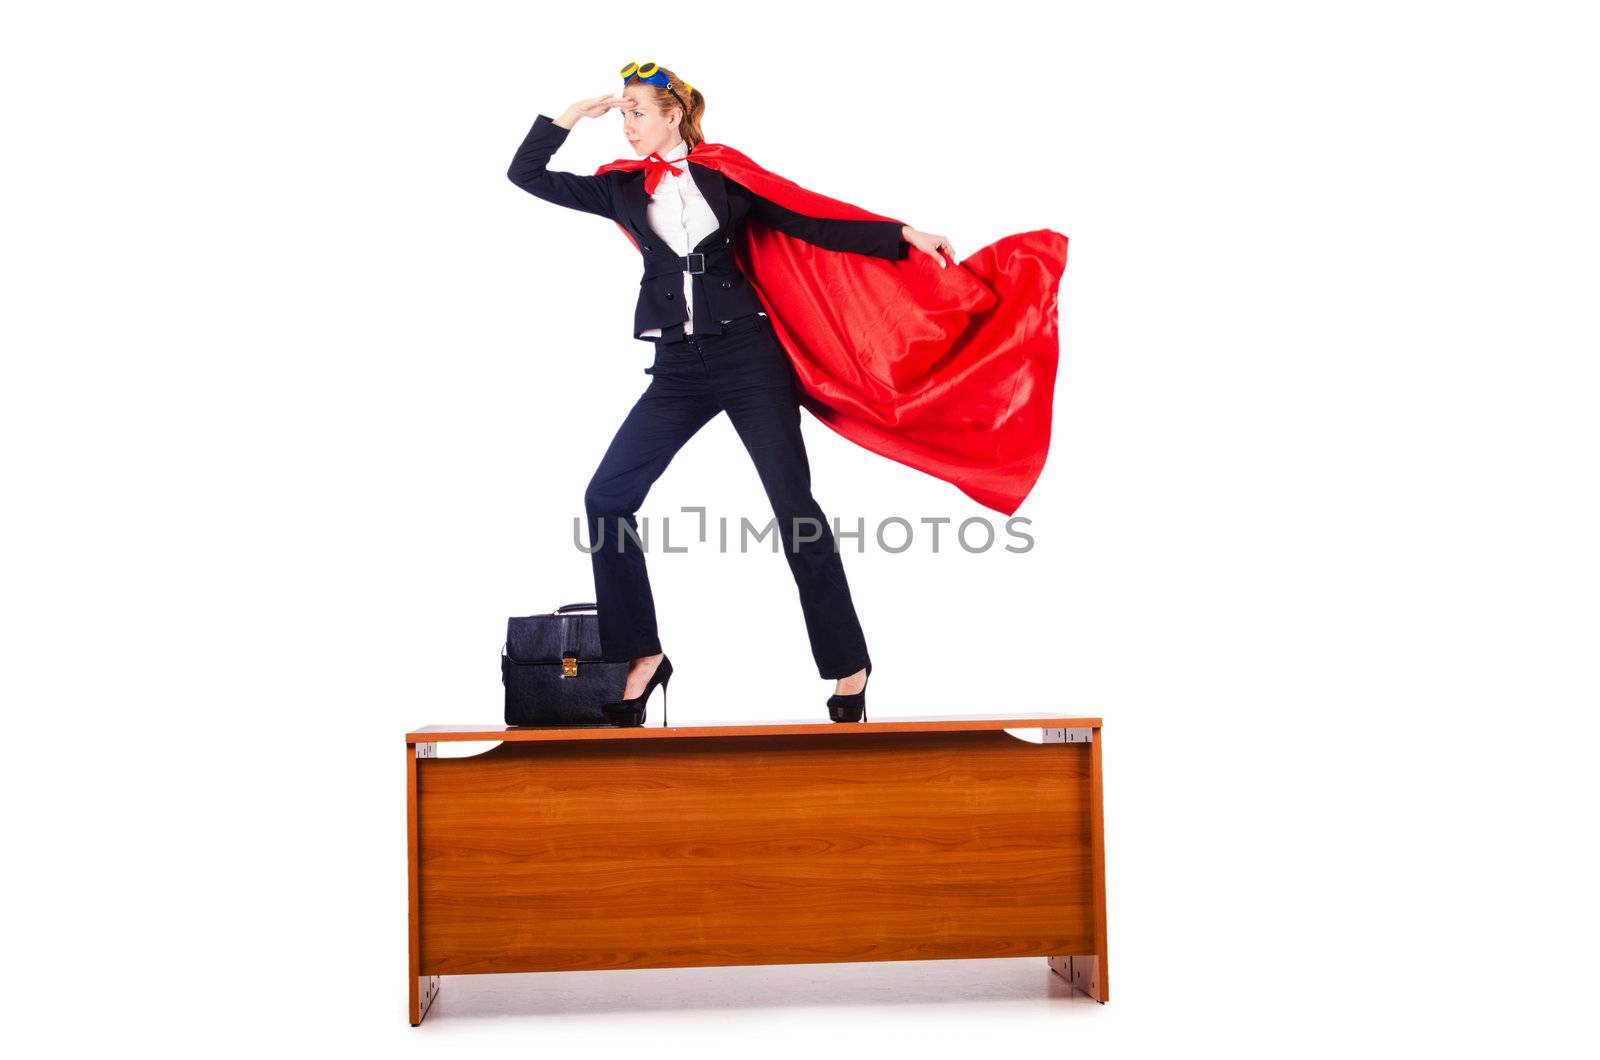 Superwoman standing on the desk